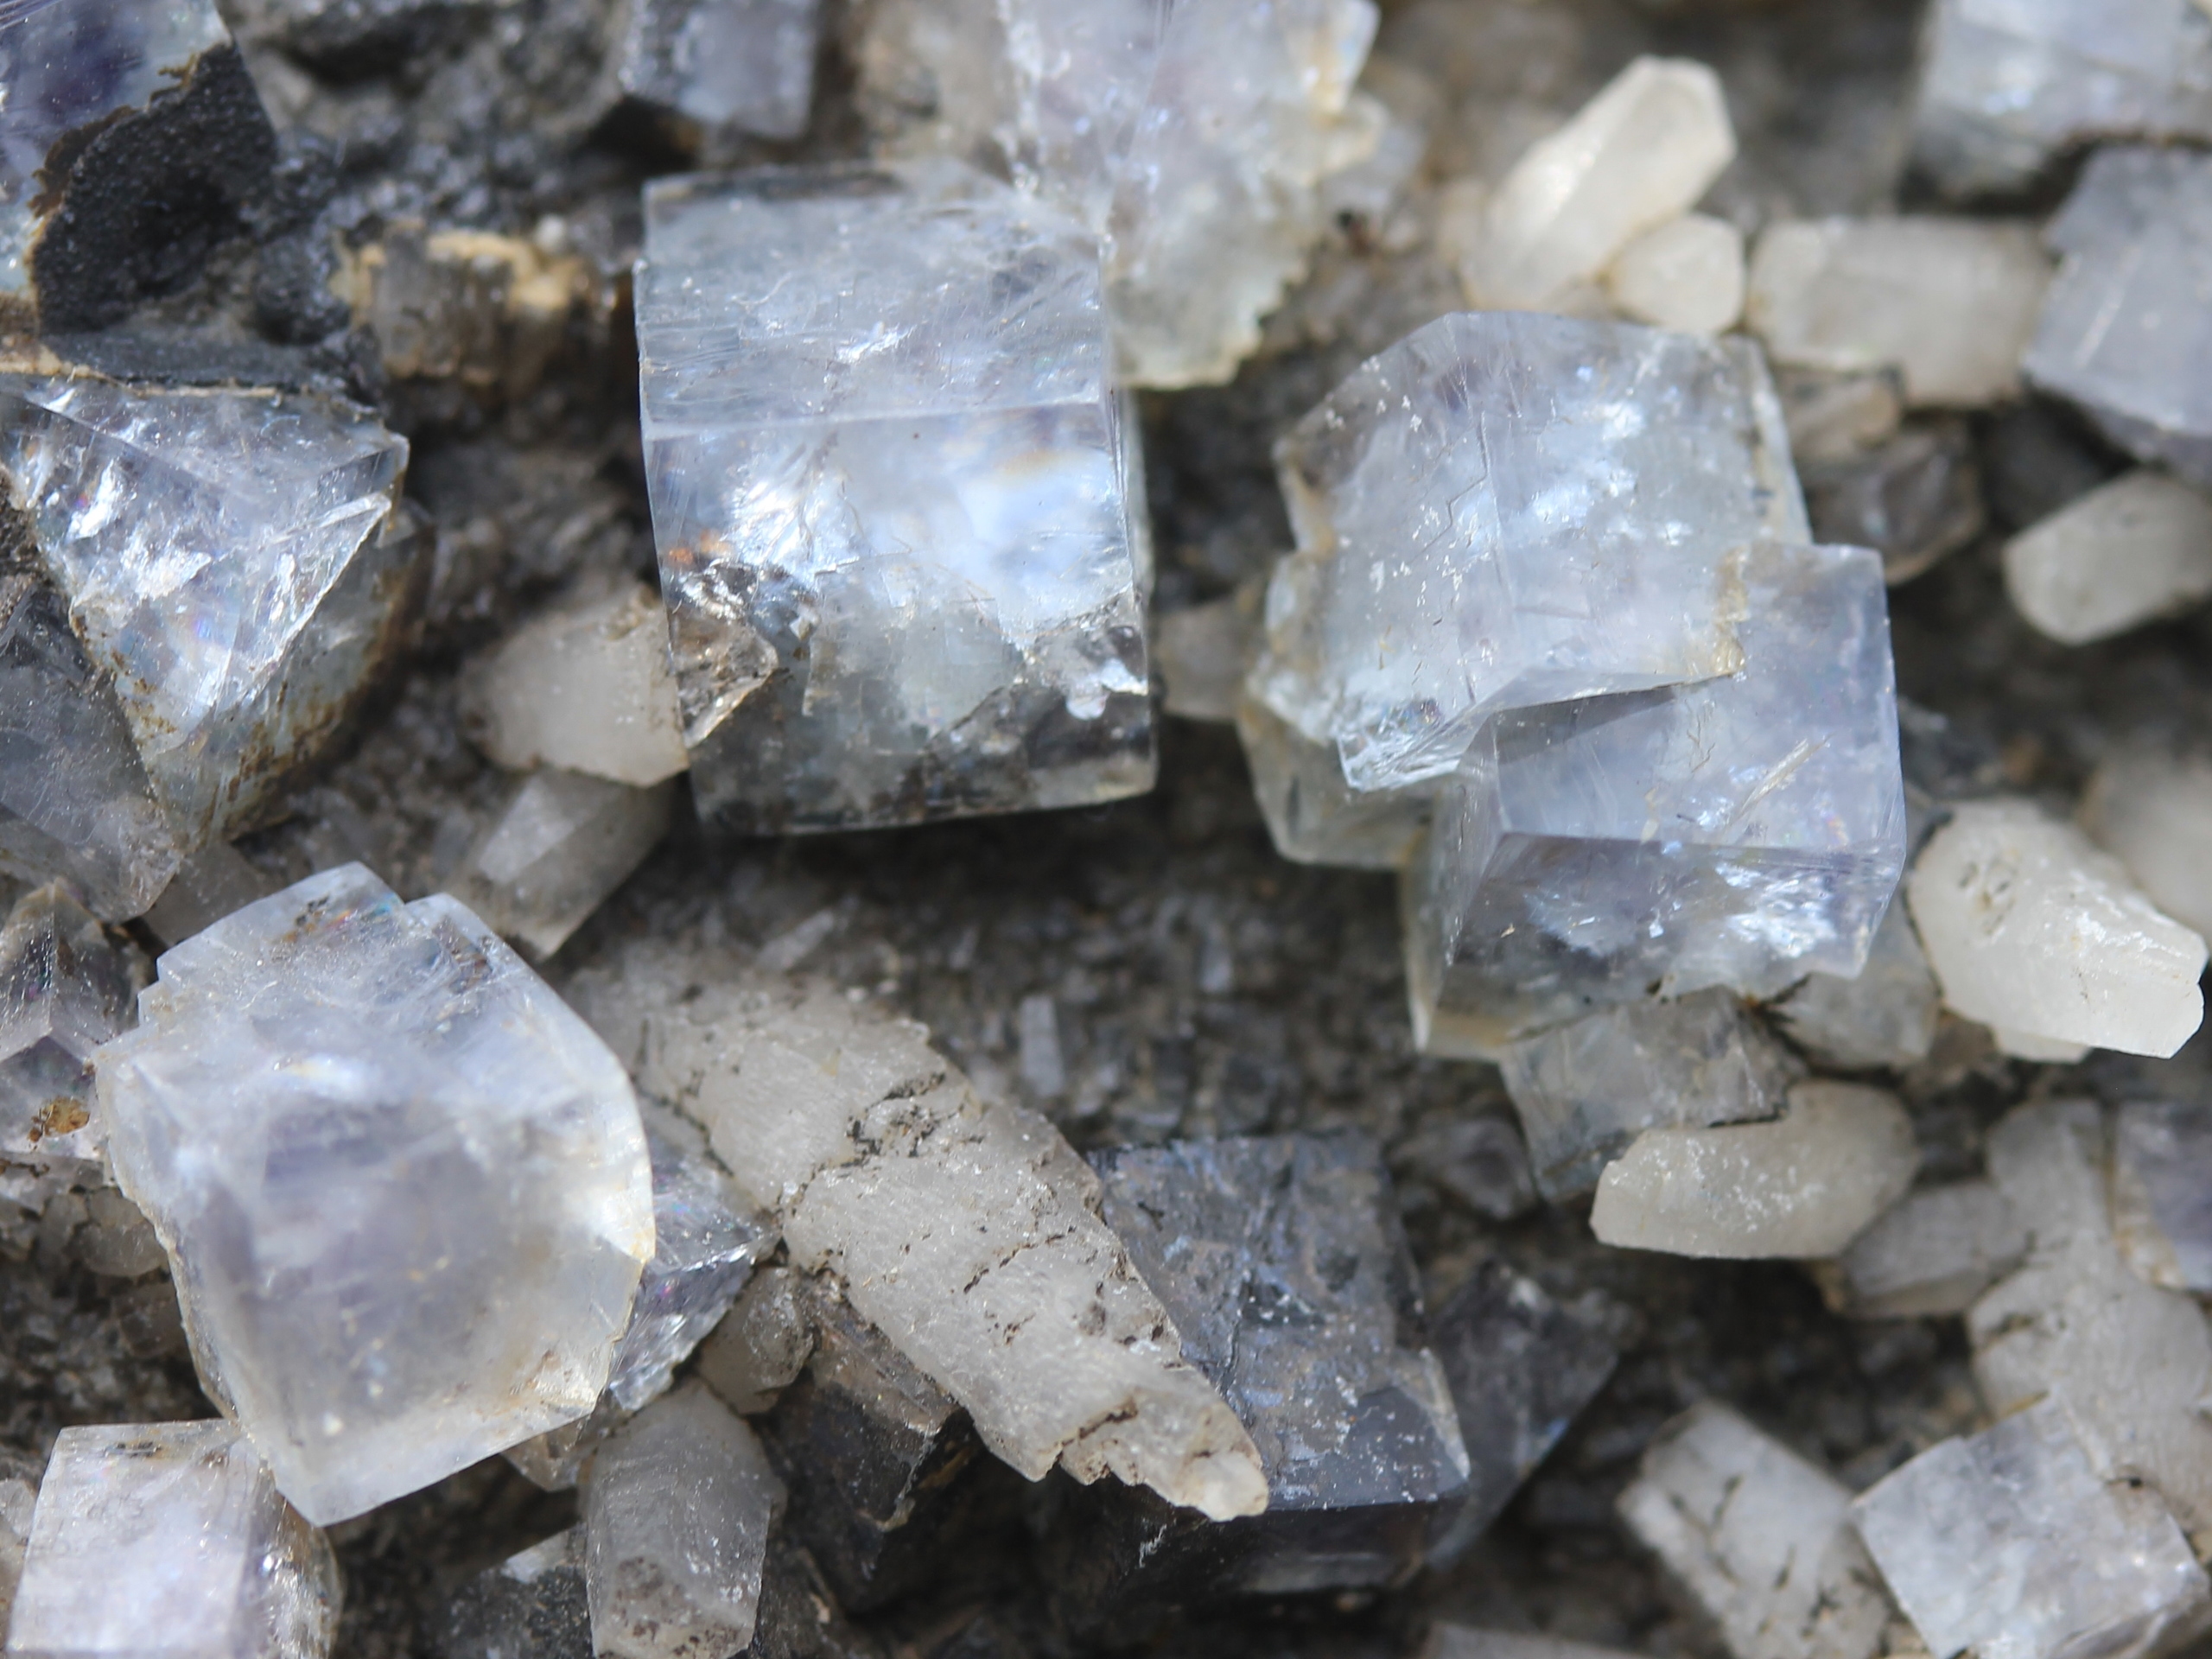 Fluorite and calcite crystals